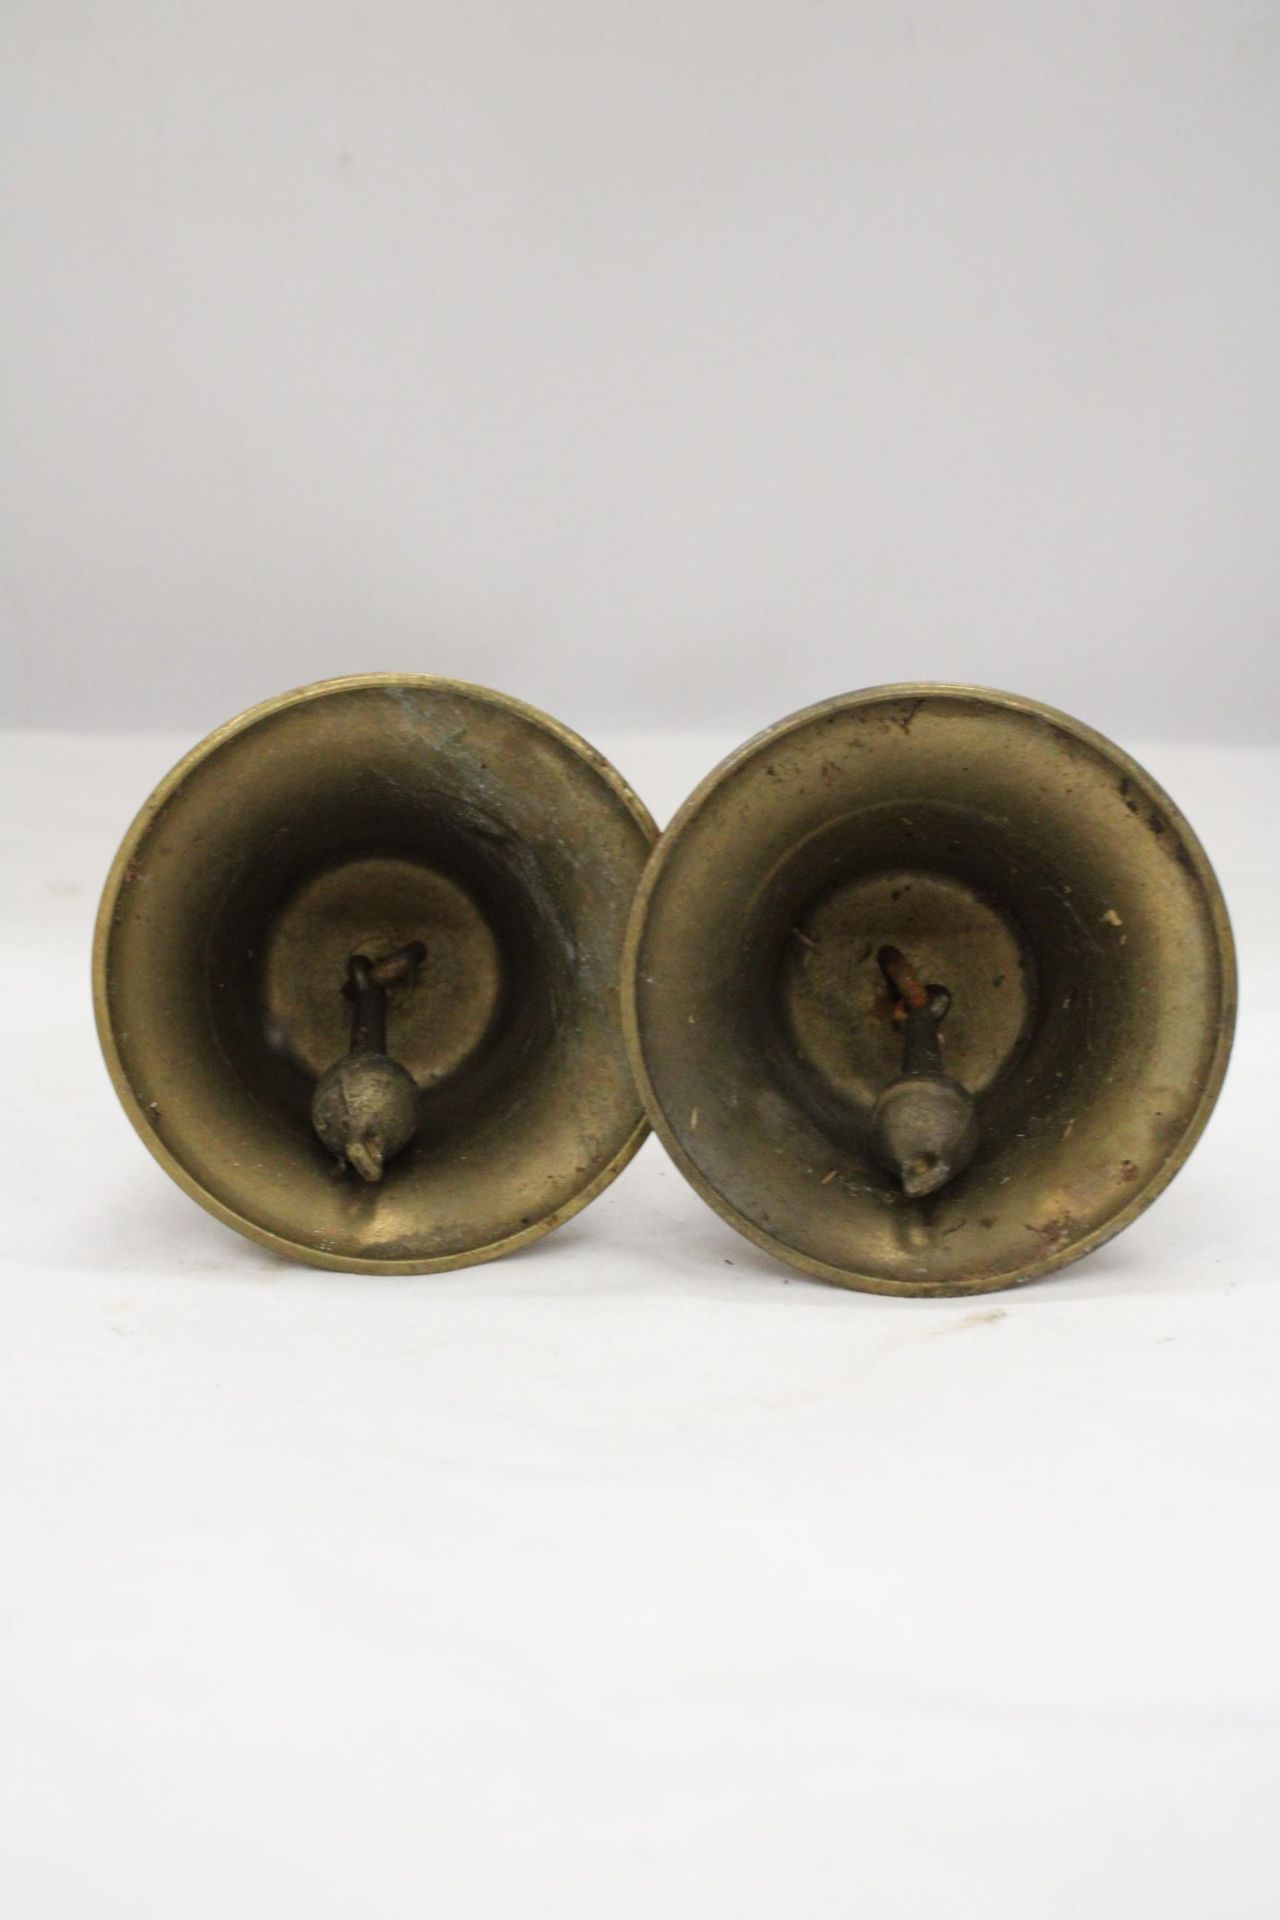 TWO BRASS 'PEGASUS' BELLS, HEIGHT 17CM - Image 5 of 6